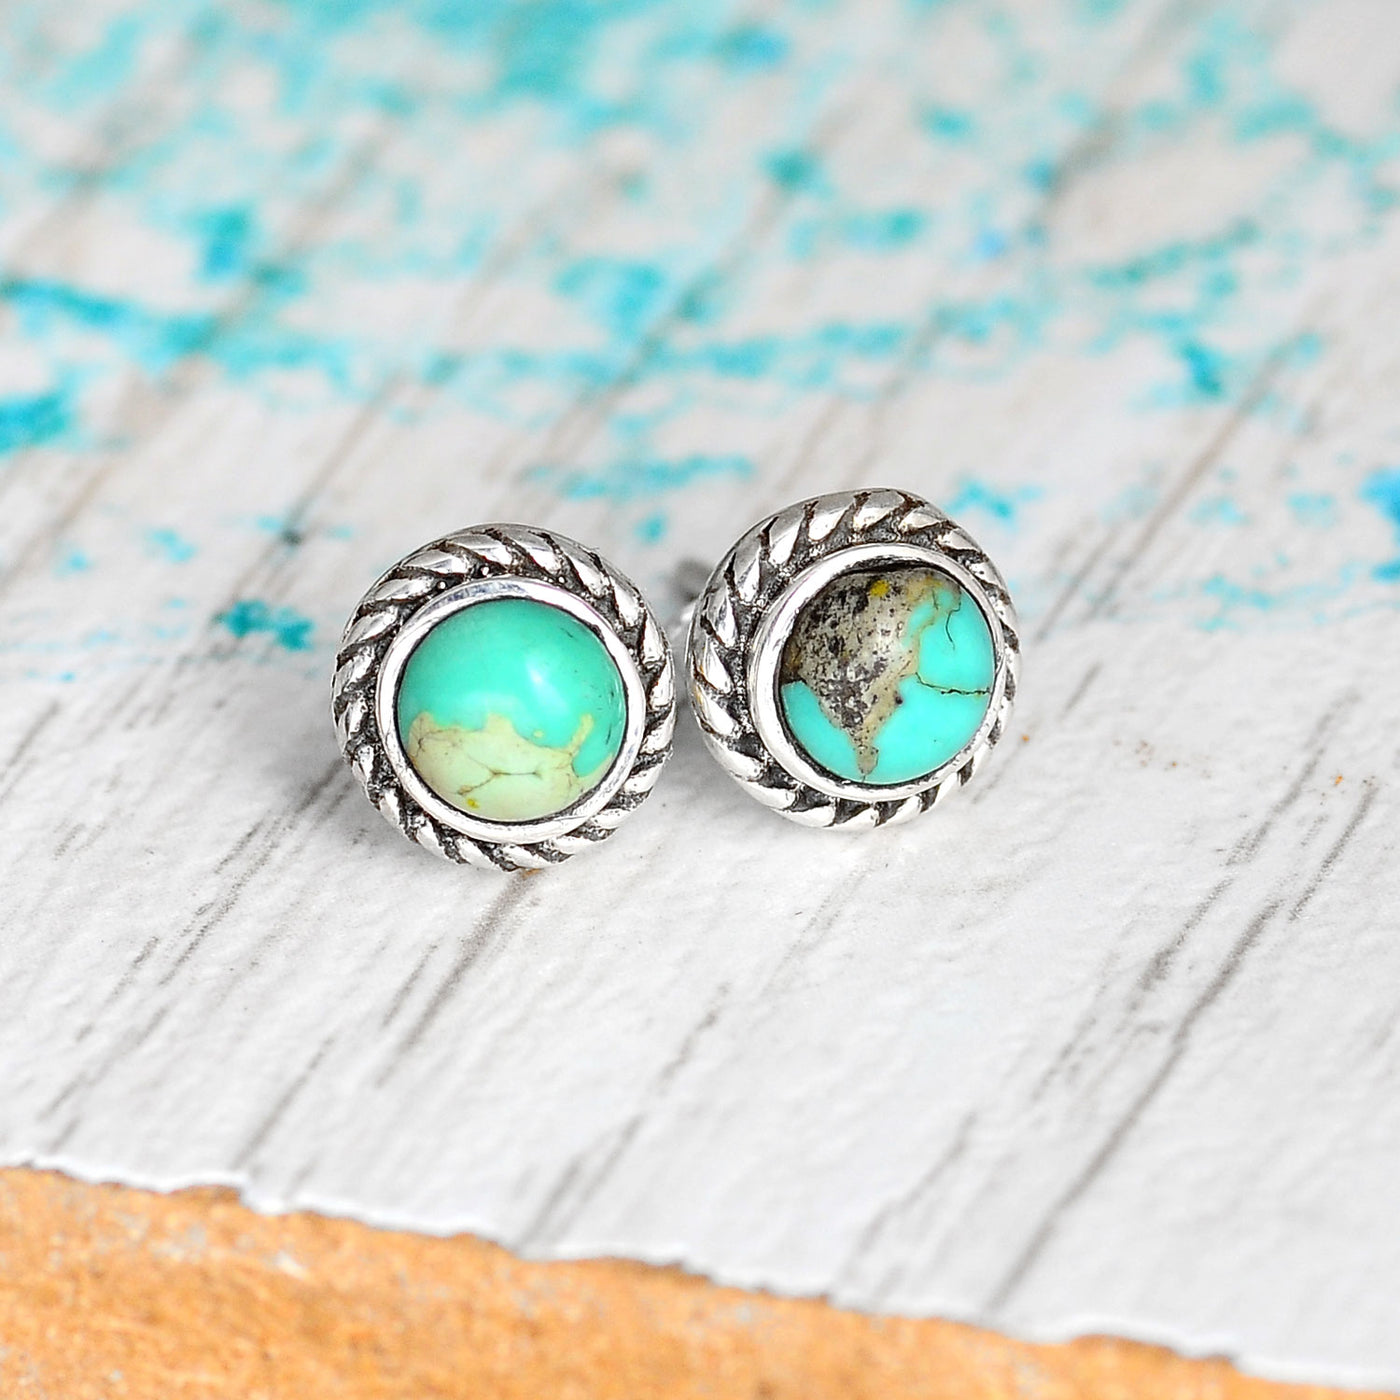 Turquoise Earrings Sterling Silver